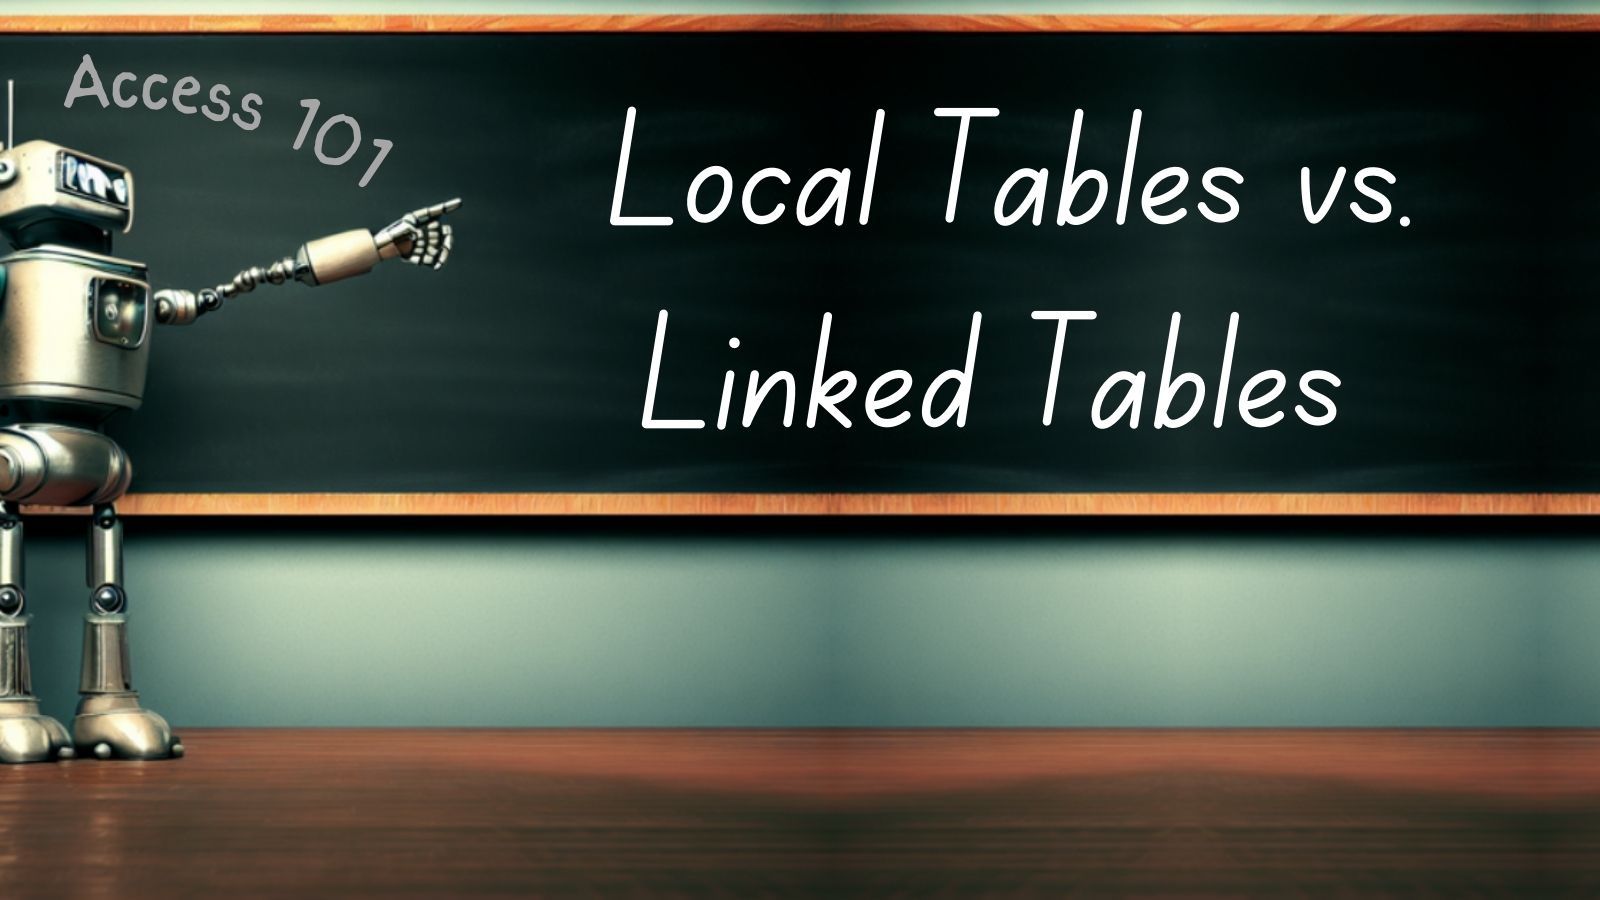 Access 101: Local vs. Linked Tables